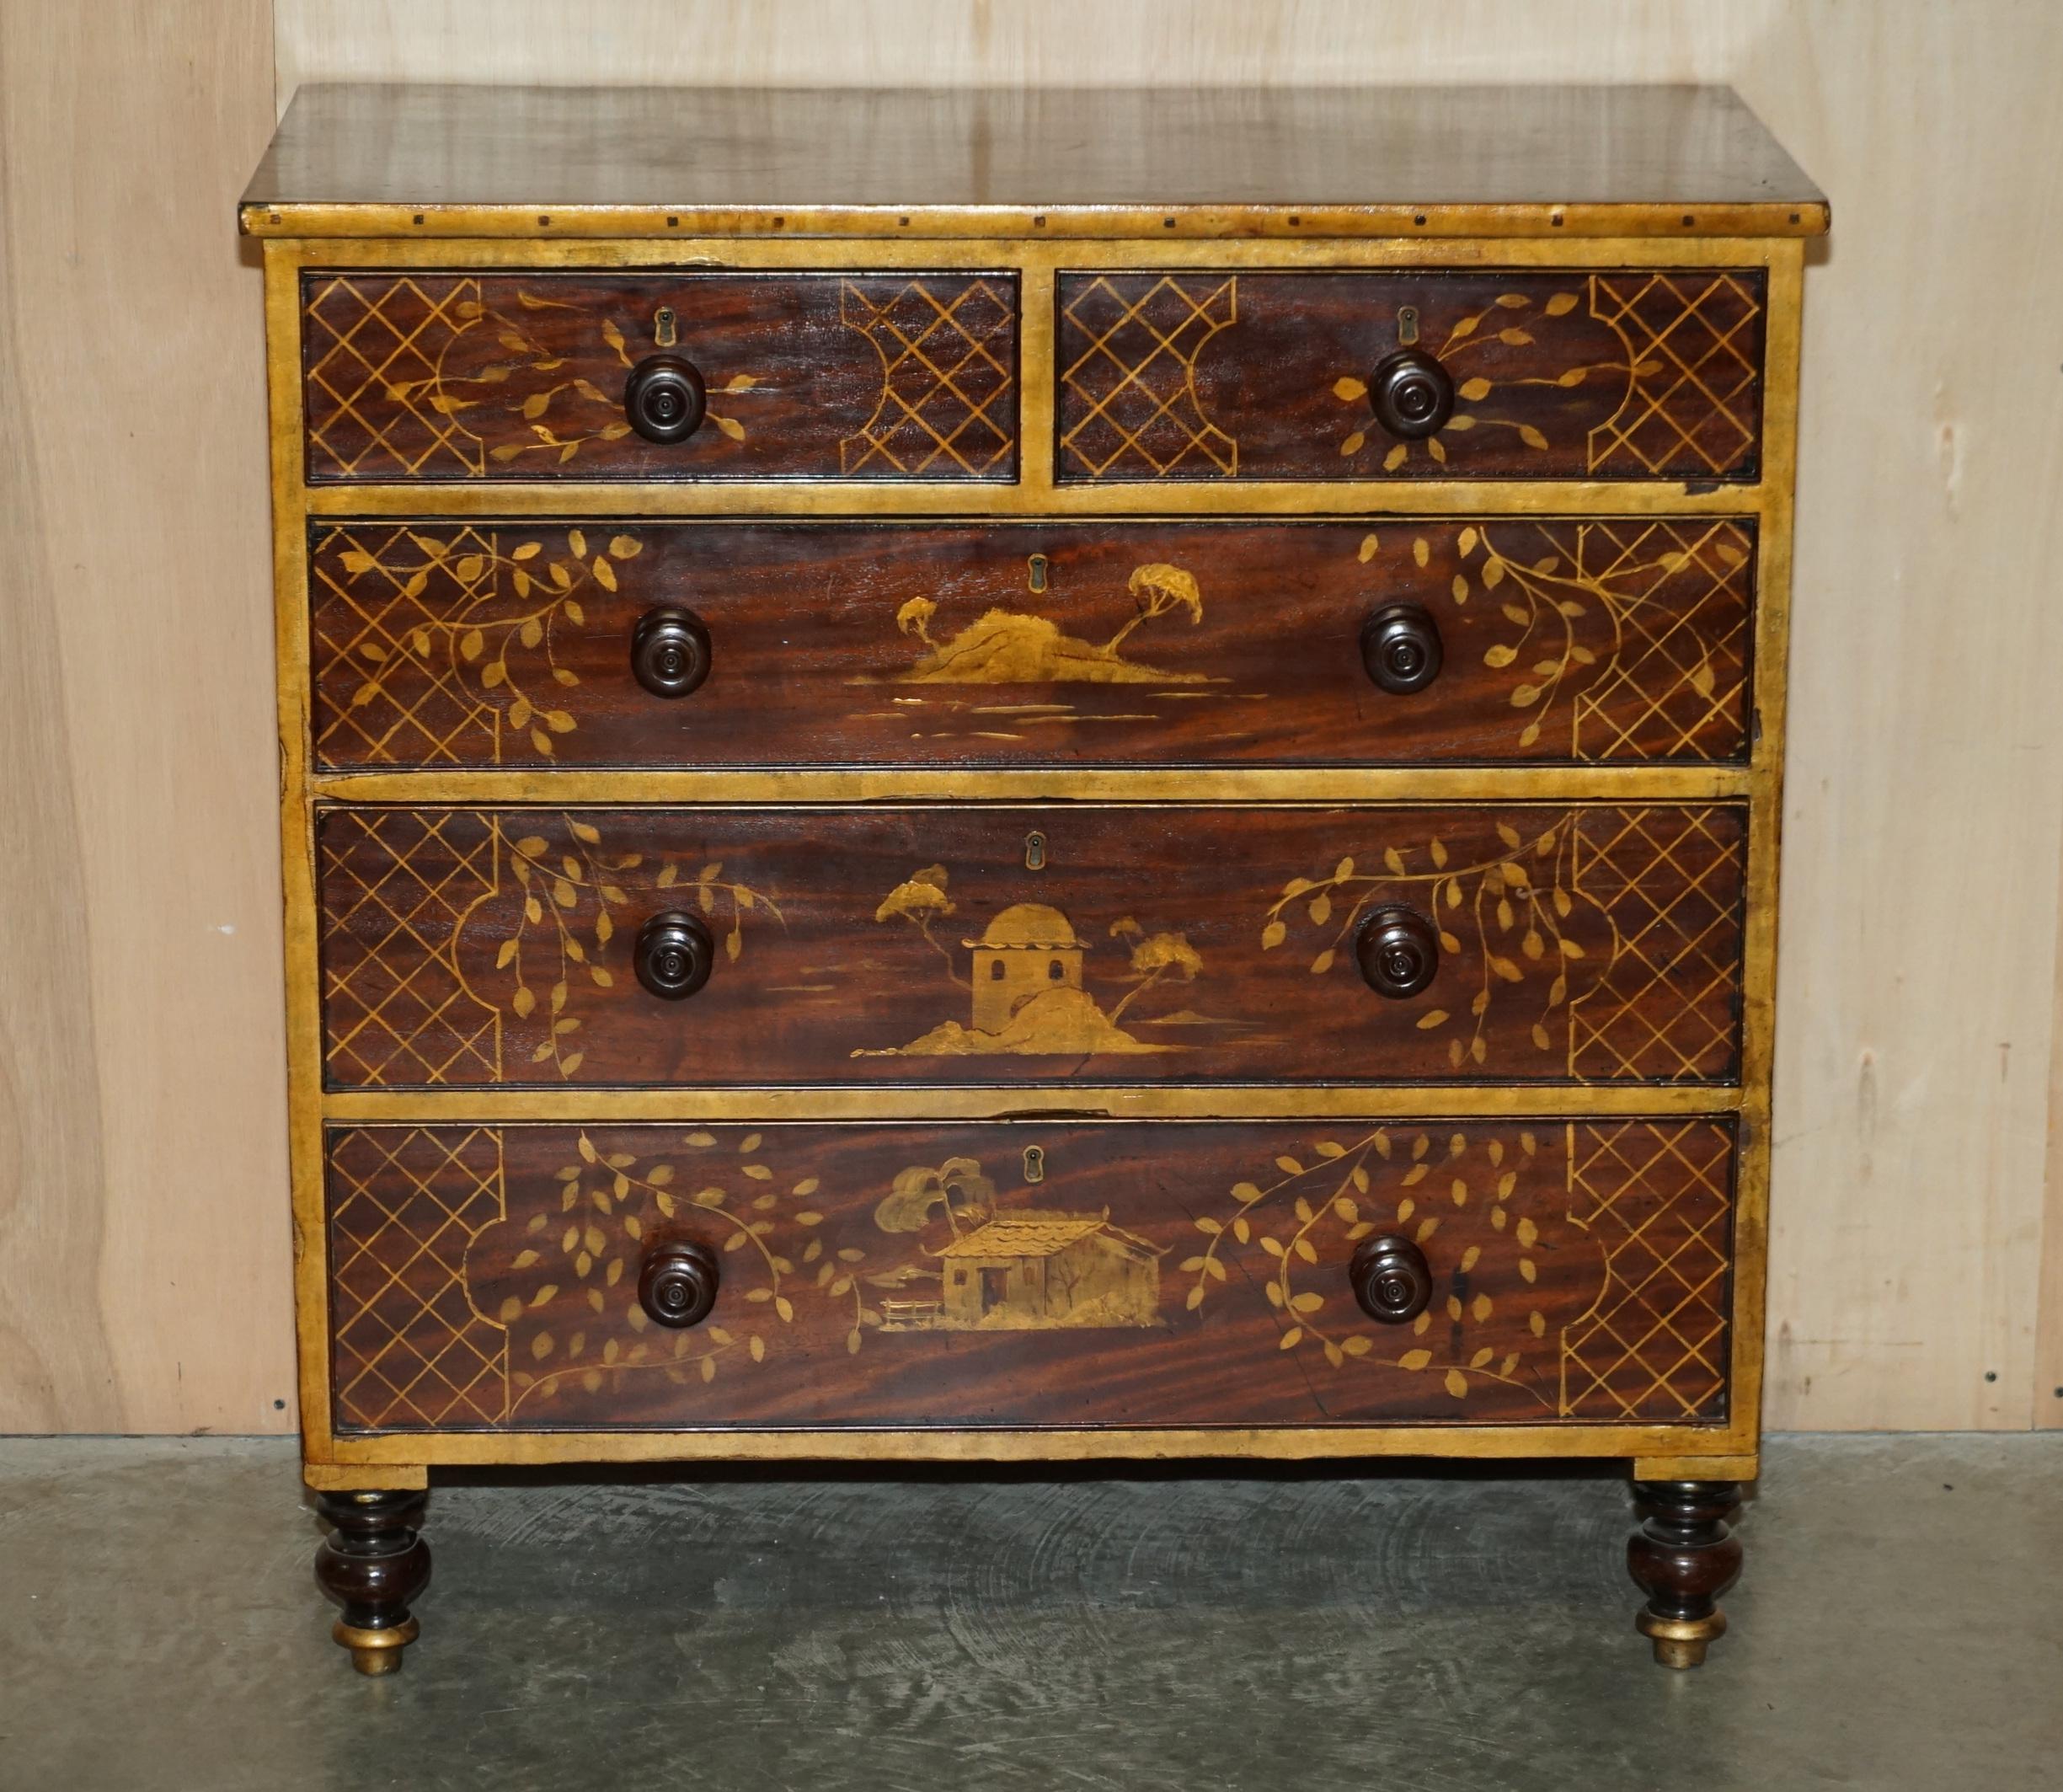 High Victorian Sublime Antique Victorian 1860 Chinese Chinoiserie Painted Chest of Drawers For Sale